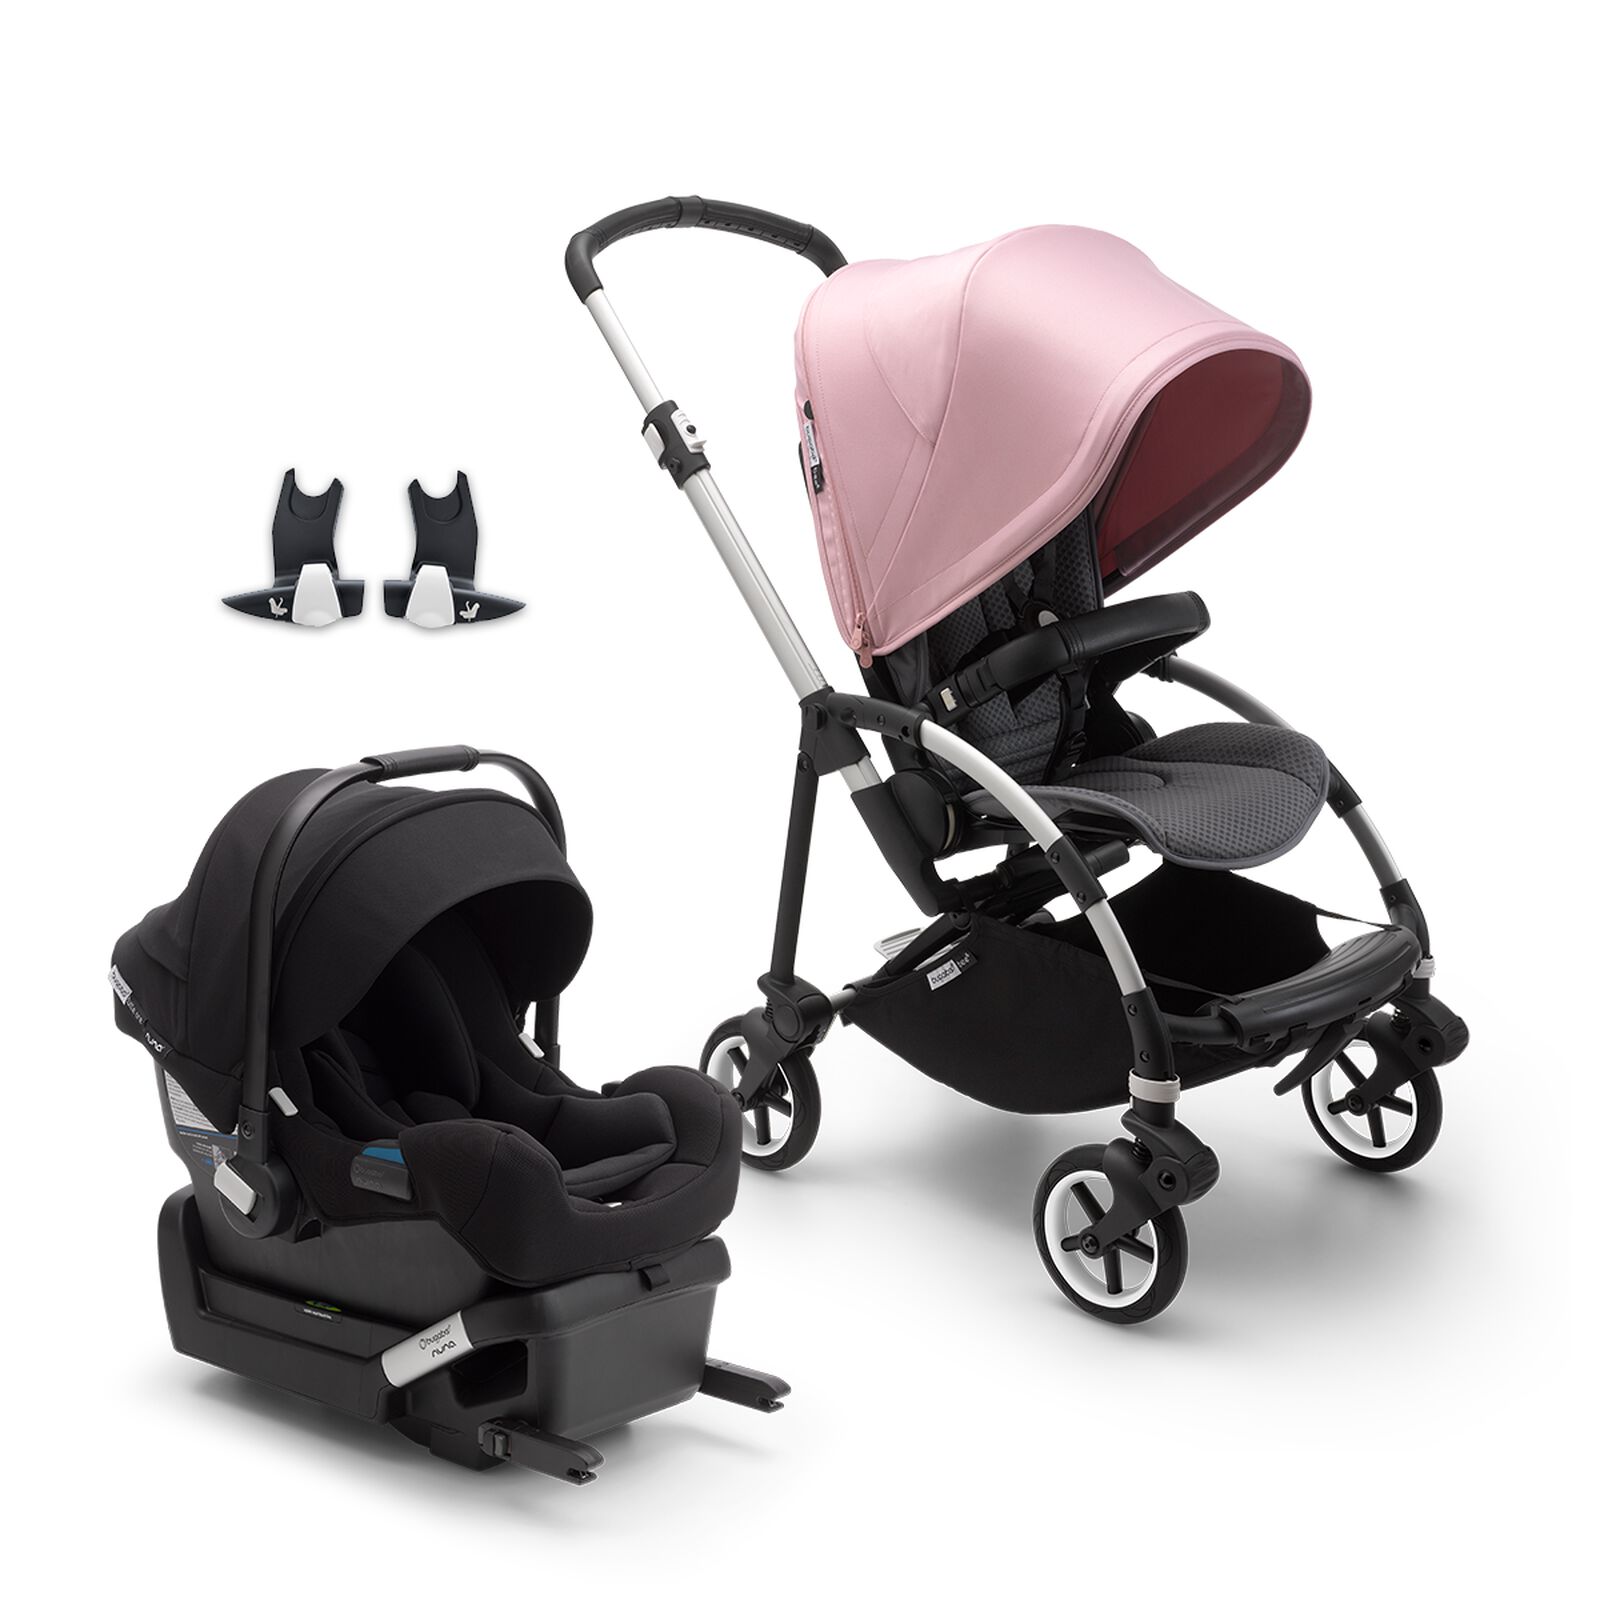 Bugaboo Bee 6 and Turtle One by Nuna bundle - View 1